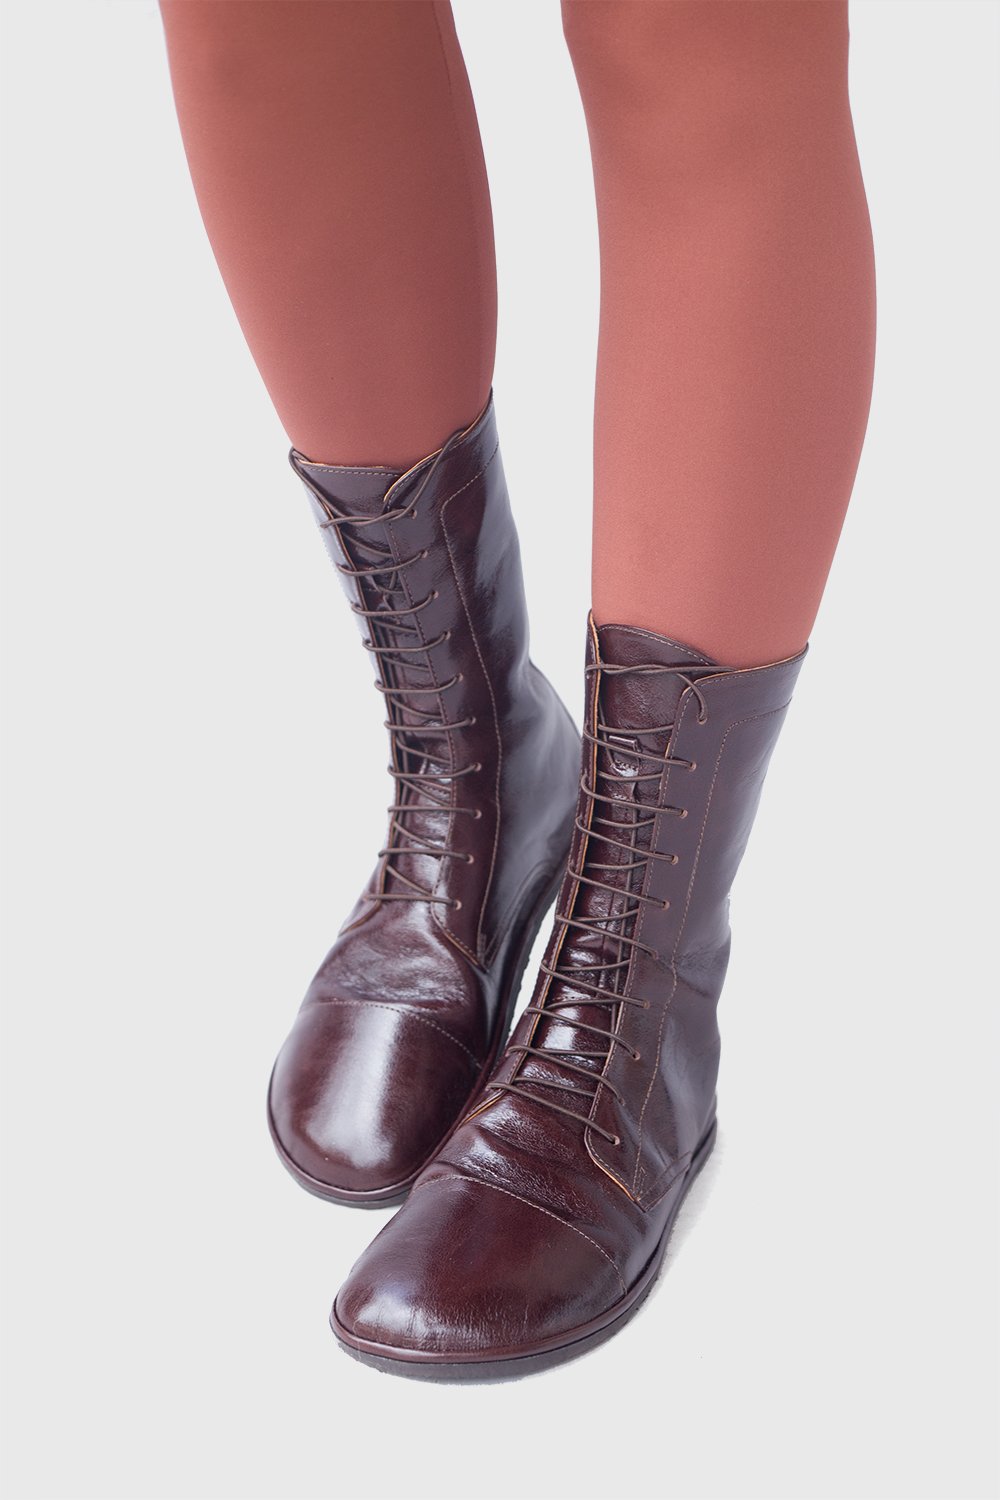 Image of Lace-up Impulse boots in Glorious Brown